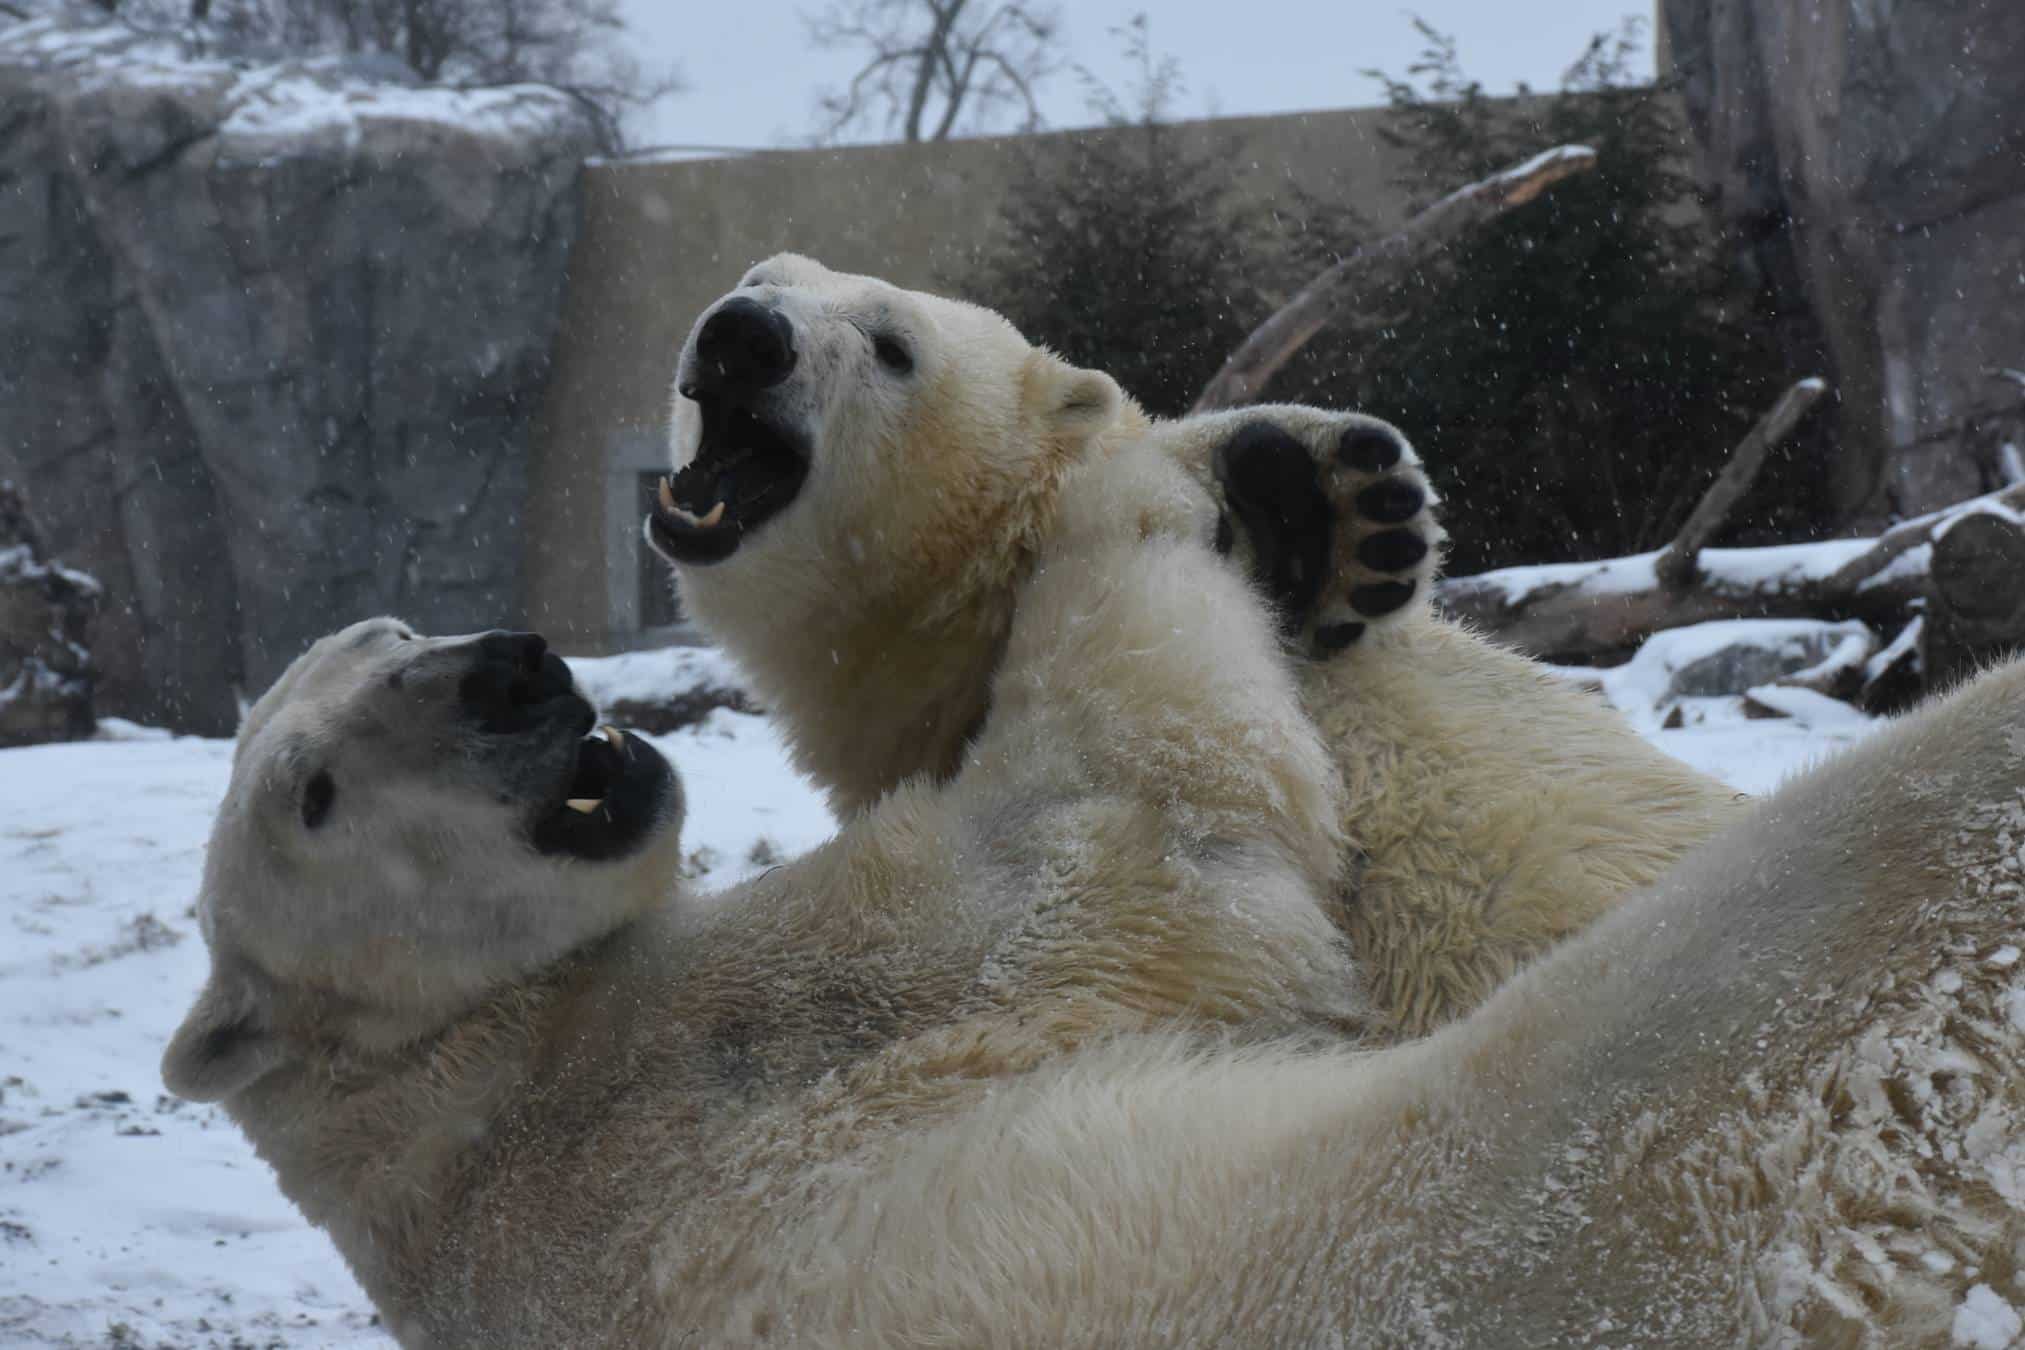 Love is in the air at the zoo and we can bear-ly stand it.